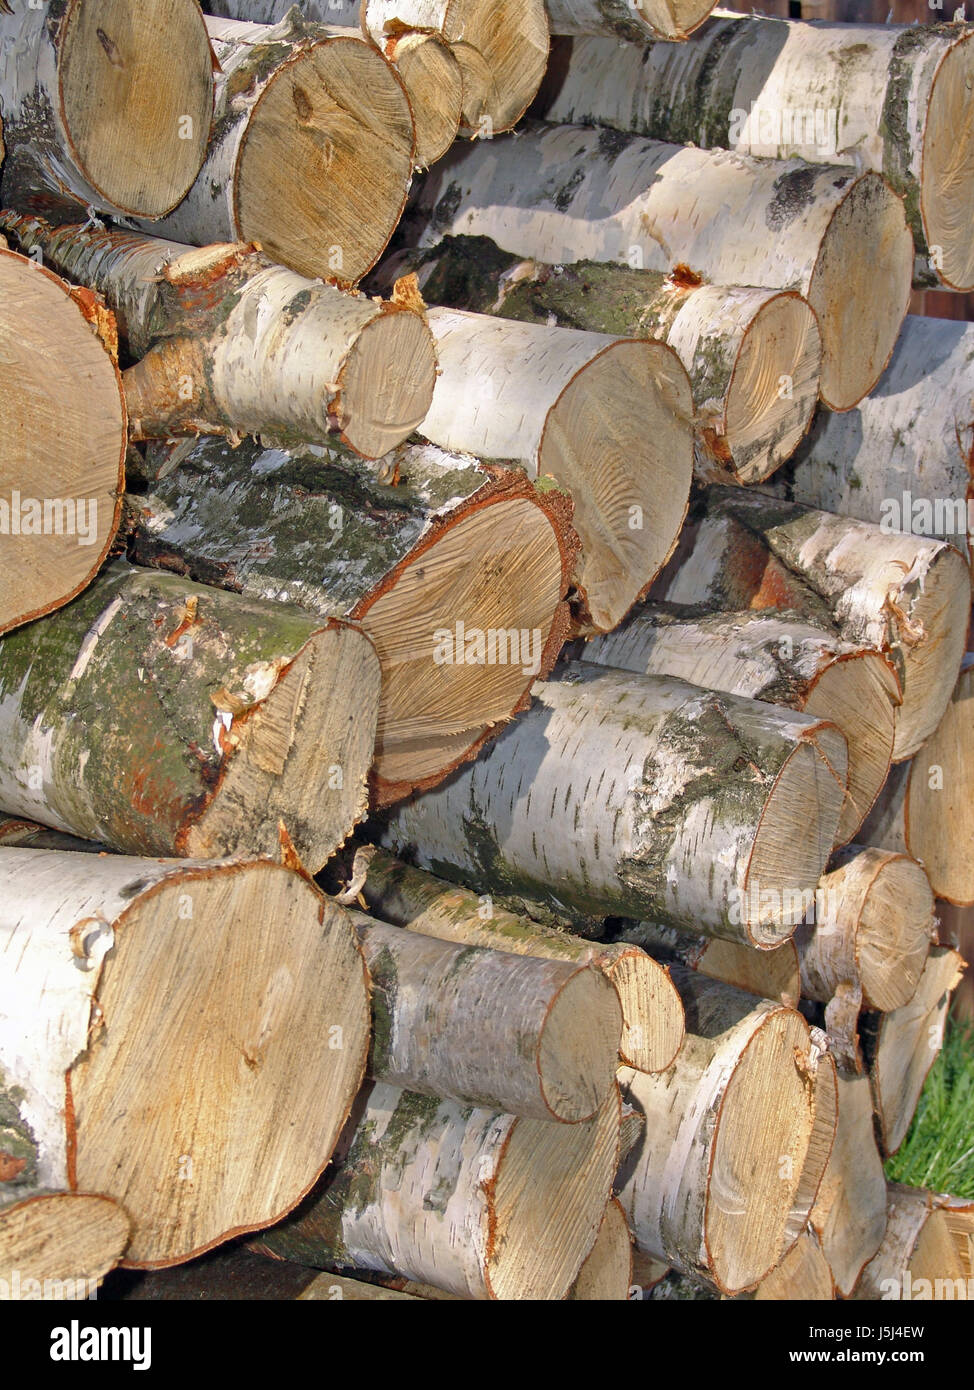 wood raw material stacked portrait format birch sawn firewood fuel said Stock Photo